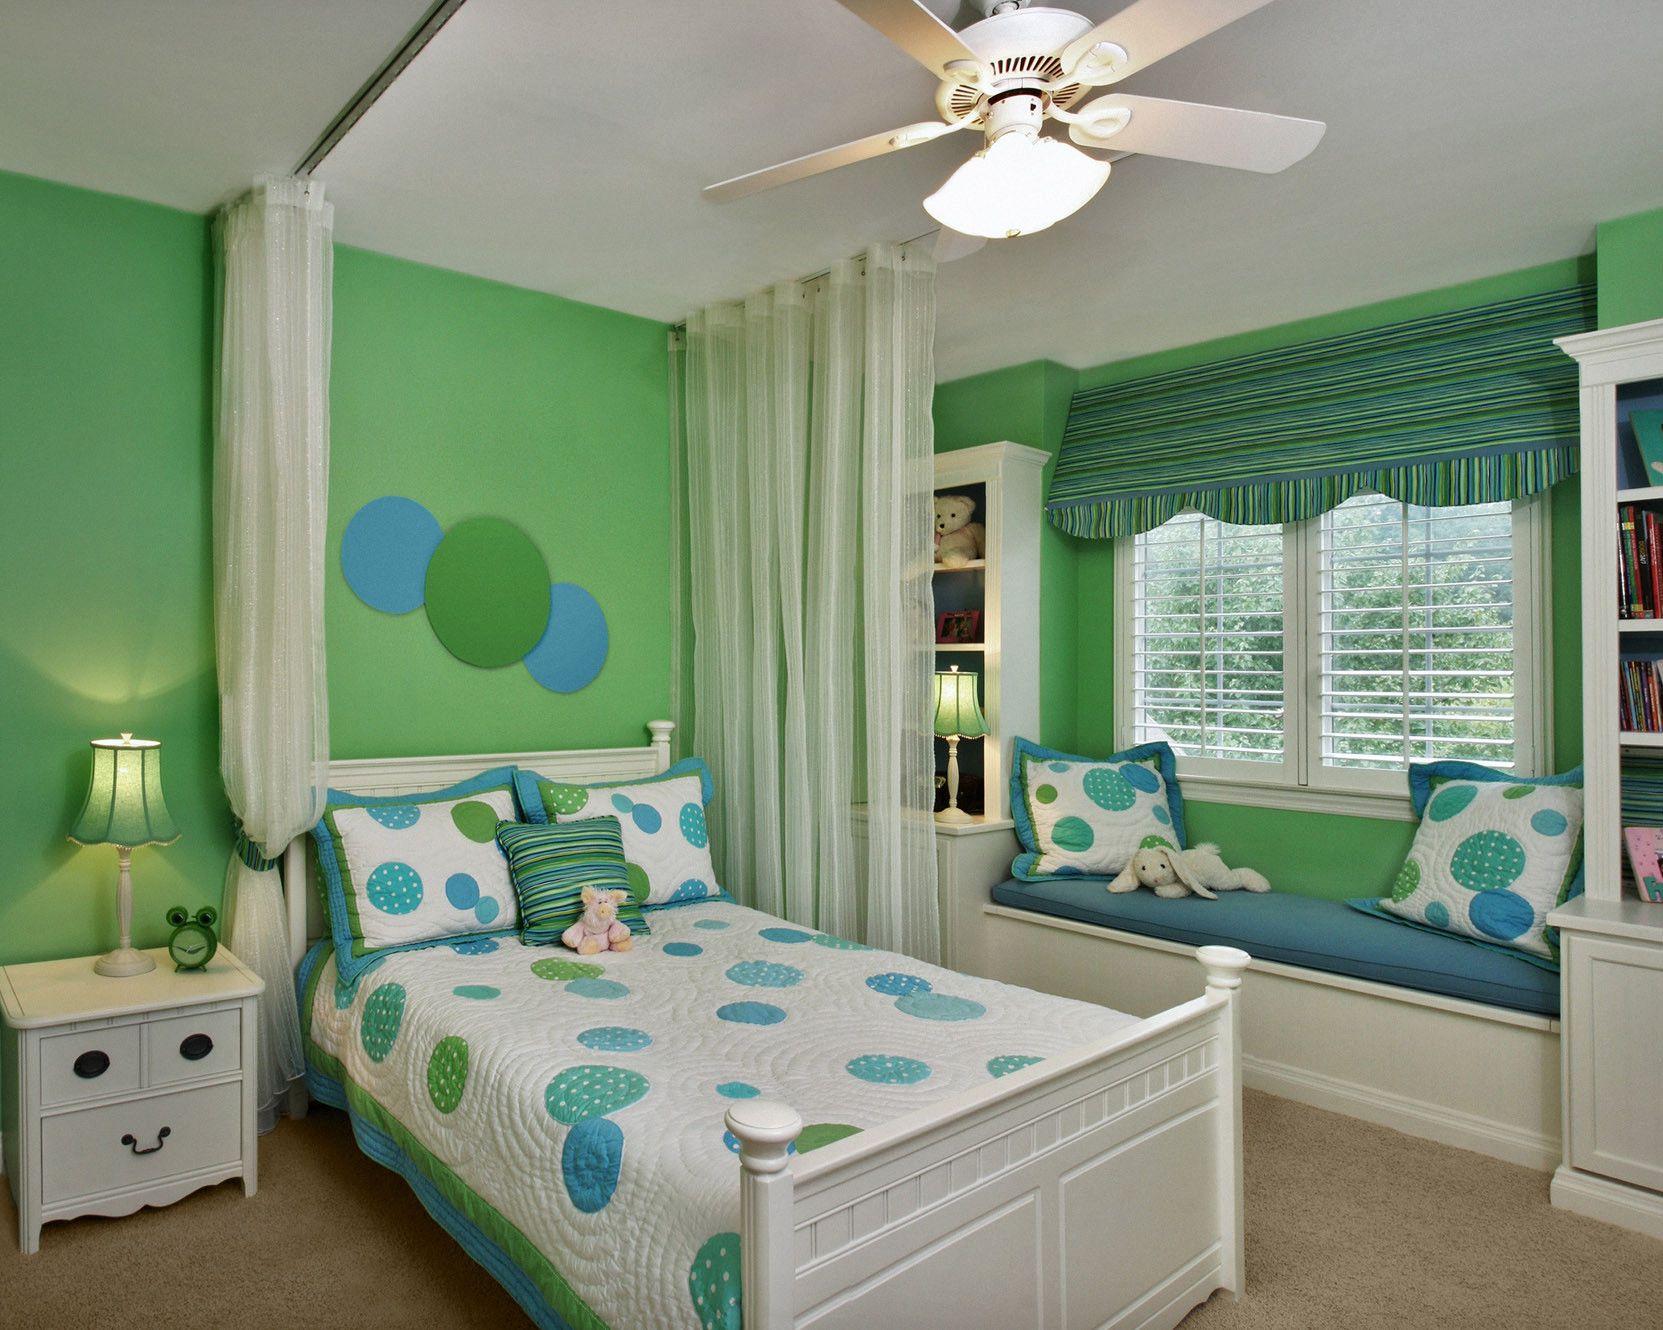 Room Designs For Kids
 The ABC’s of Decorating…K is for Kid’s Rooms